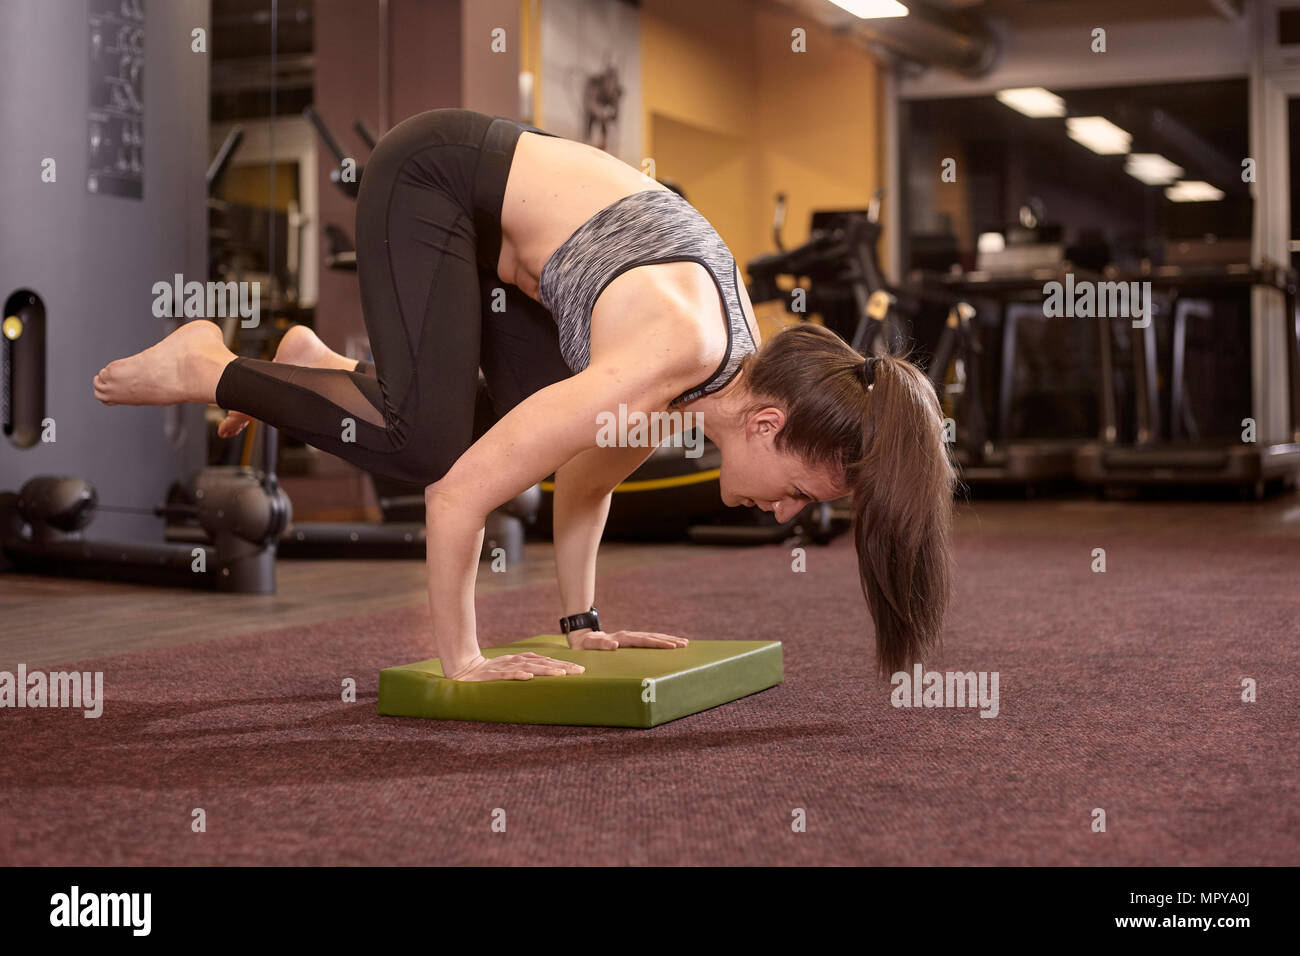 Full length of woman bending while practicing handstand at gym Stock Photo